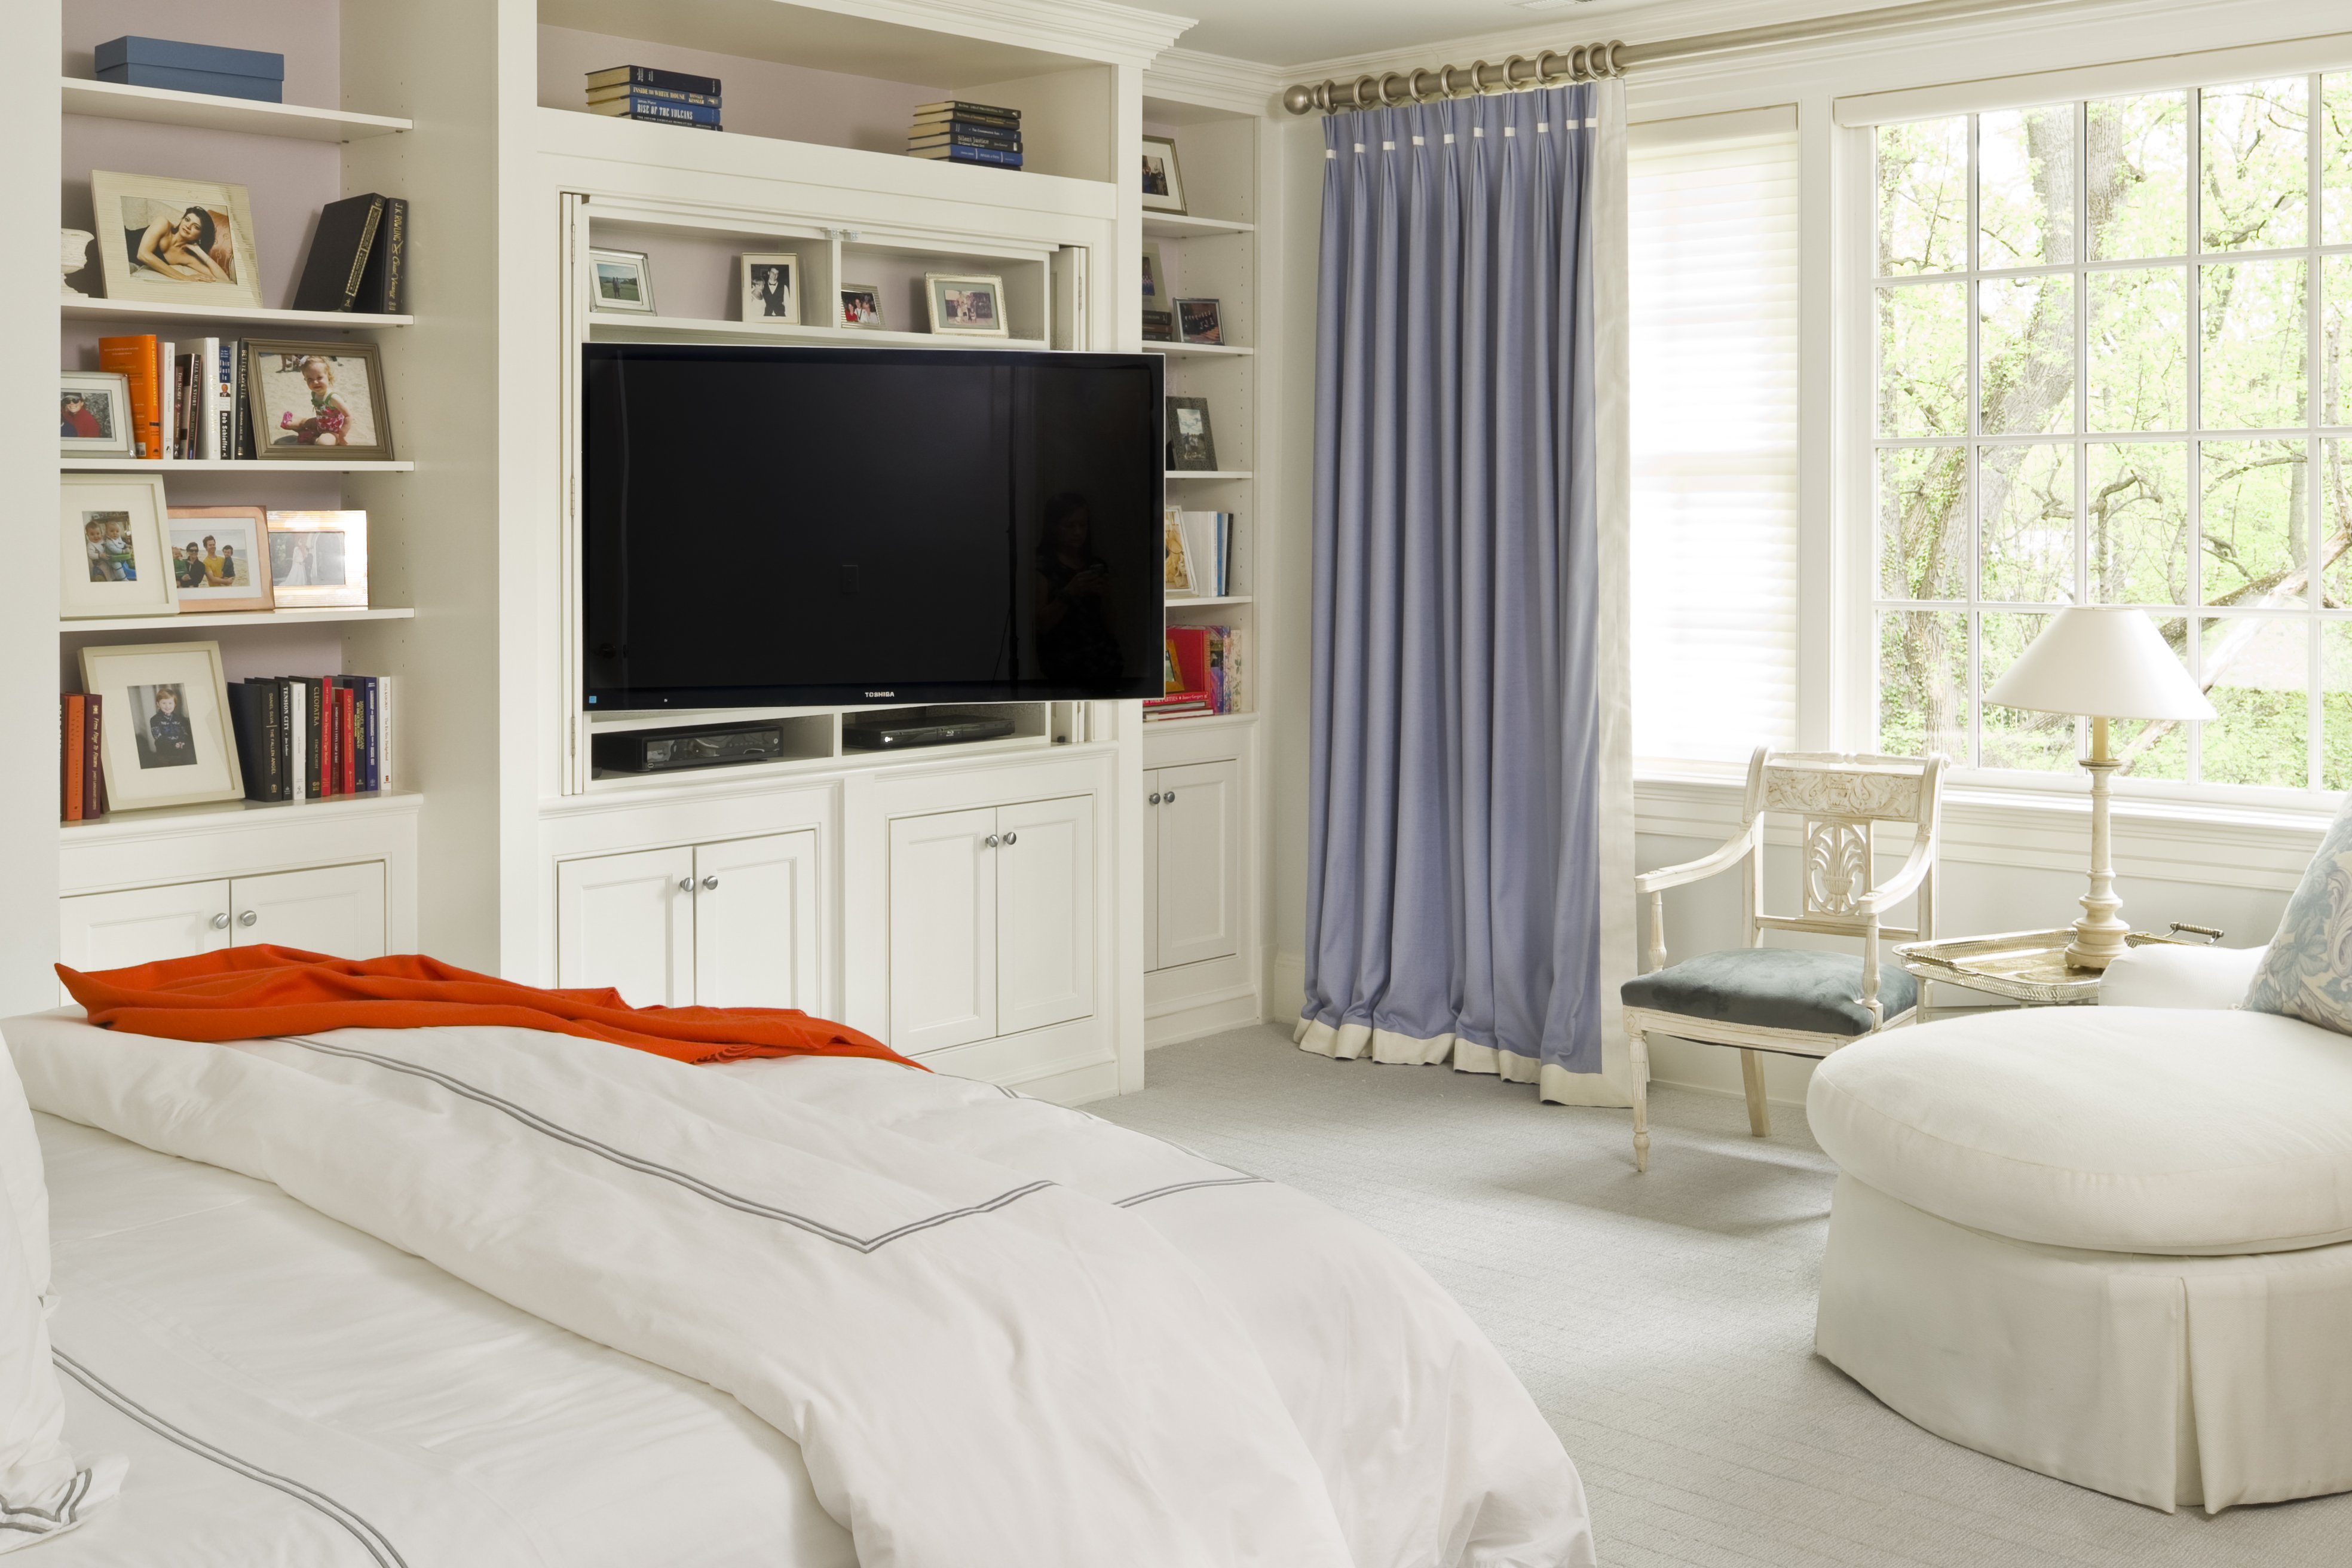 Geoff Tracy and Norah O'Donnell's son's blue and cream-white bedroom with a flat-screen TV. | Photo: Getty Images